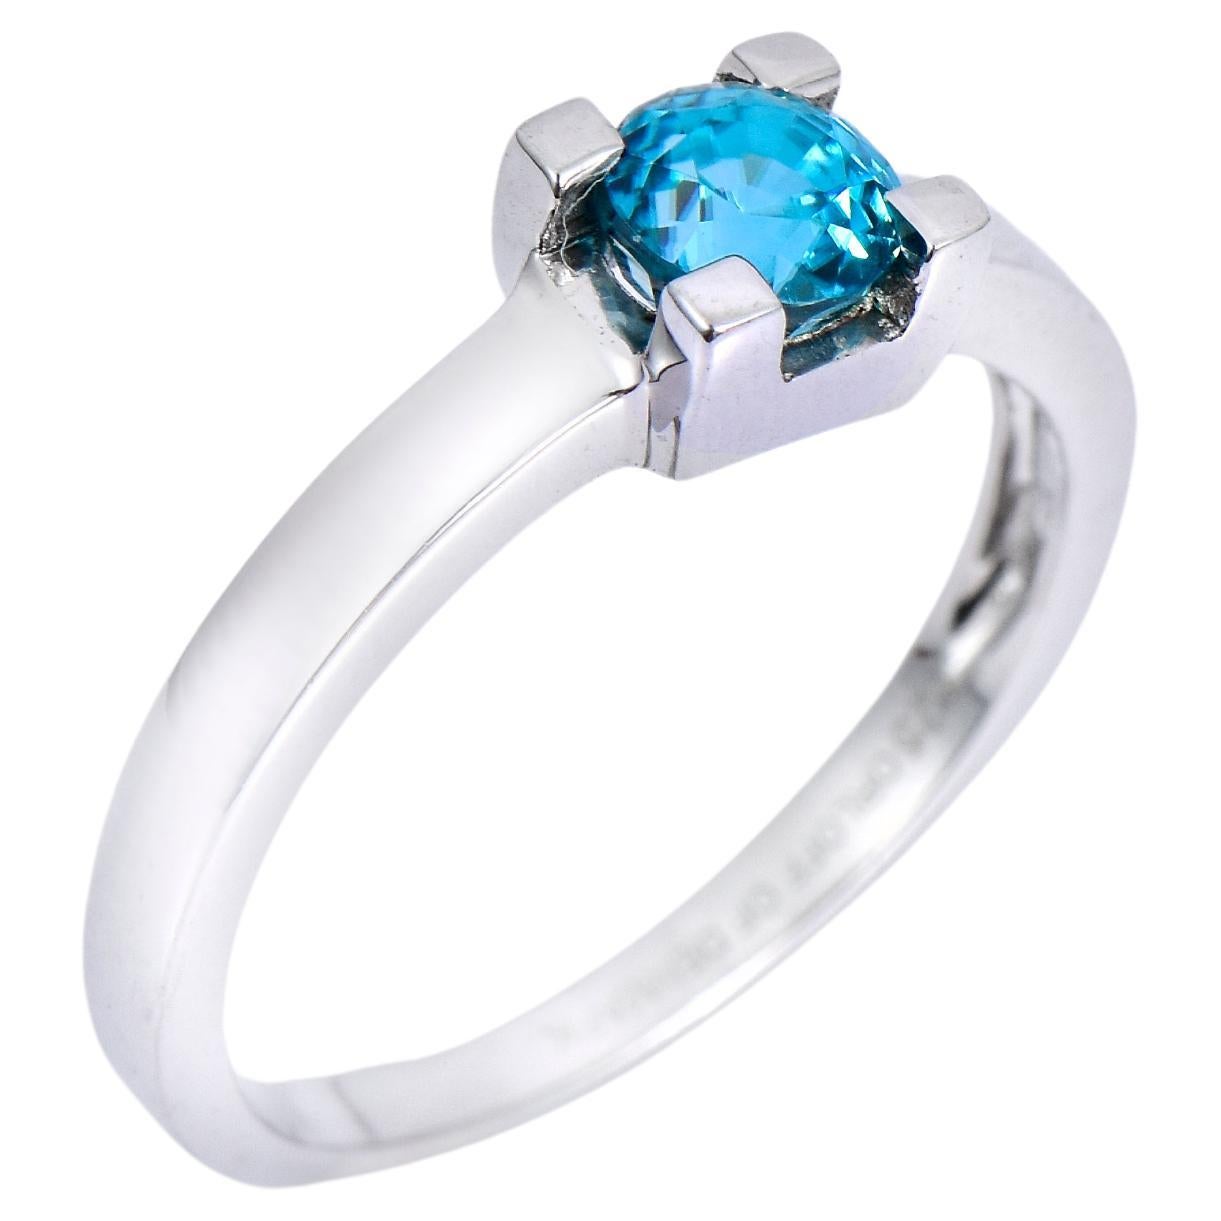 Orloff of Denmark, 1.09 ct Natural Blue Zircon Ring in 925 Sterling Silver